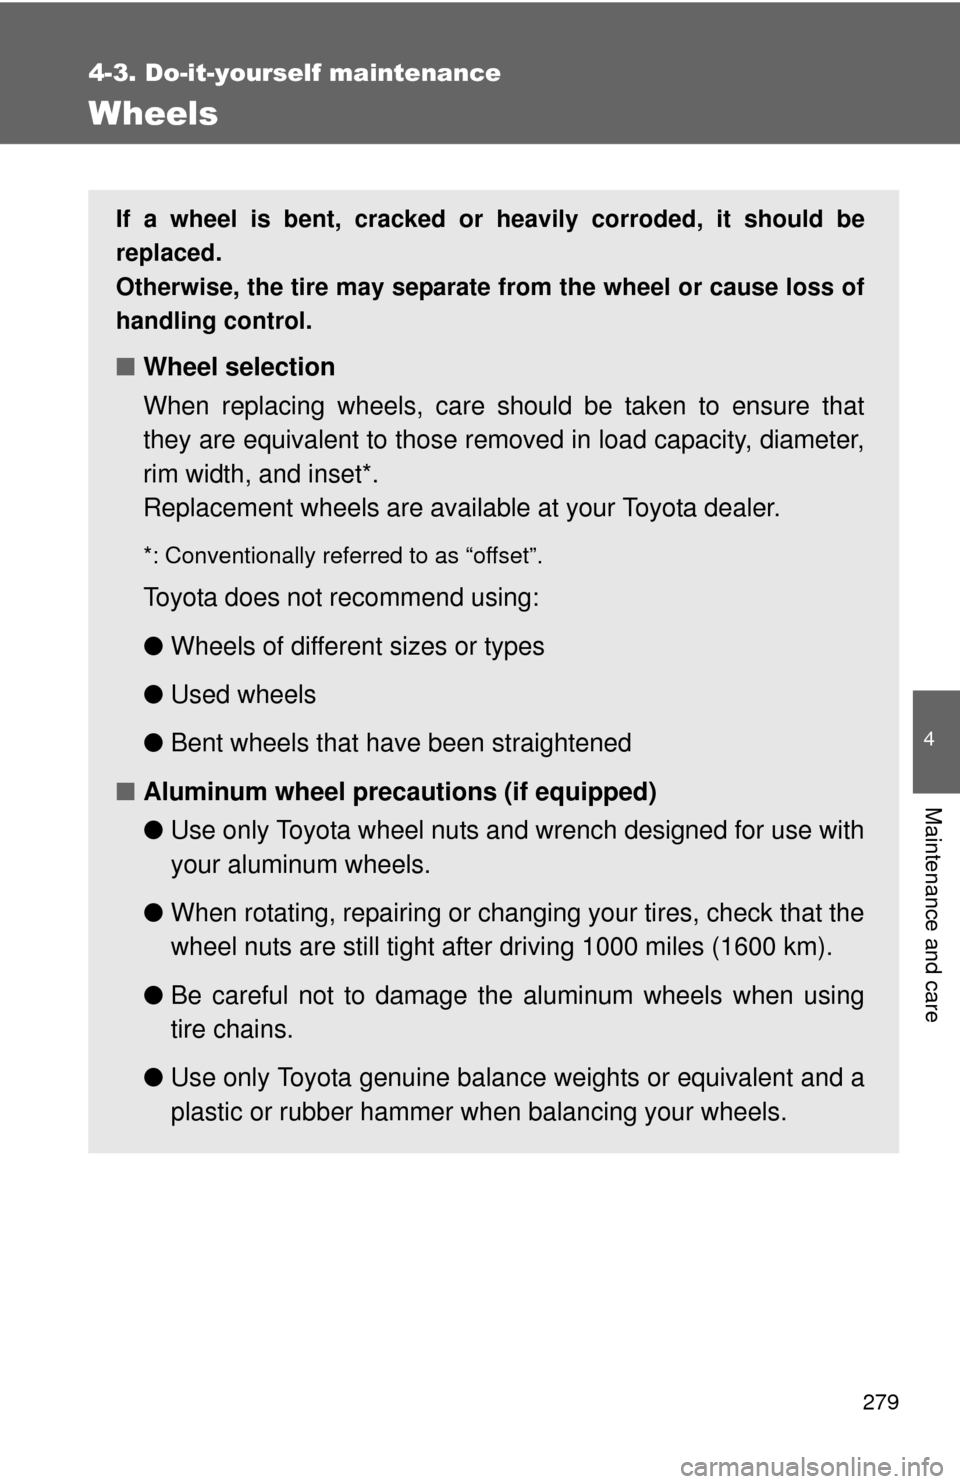 TOYOTA YARIS 2011 3.G Owners Manual 279
4-3. Do-it-yourself maintenance
4
Maintenance and care
Wheels
If a wheel is bent, cracked or heavily corroded, it should be
replaced.
Otherwise, the tire may separate from the wheel or cause loss 